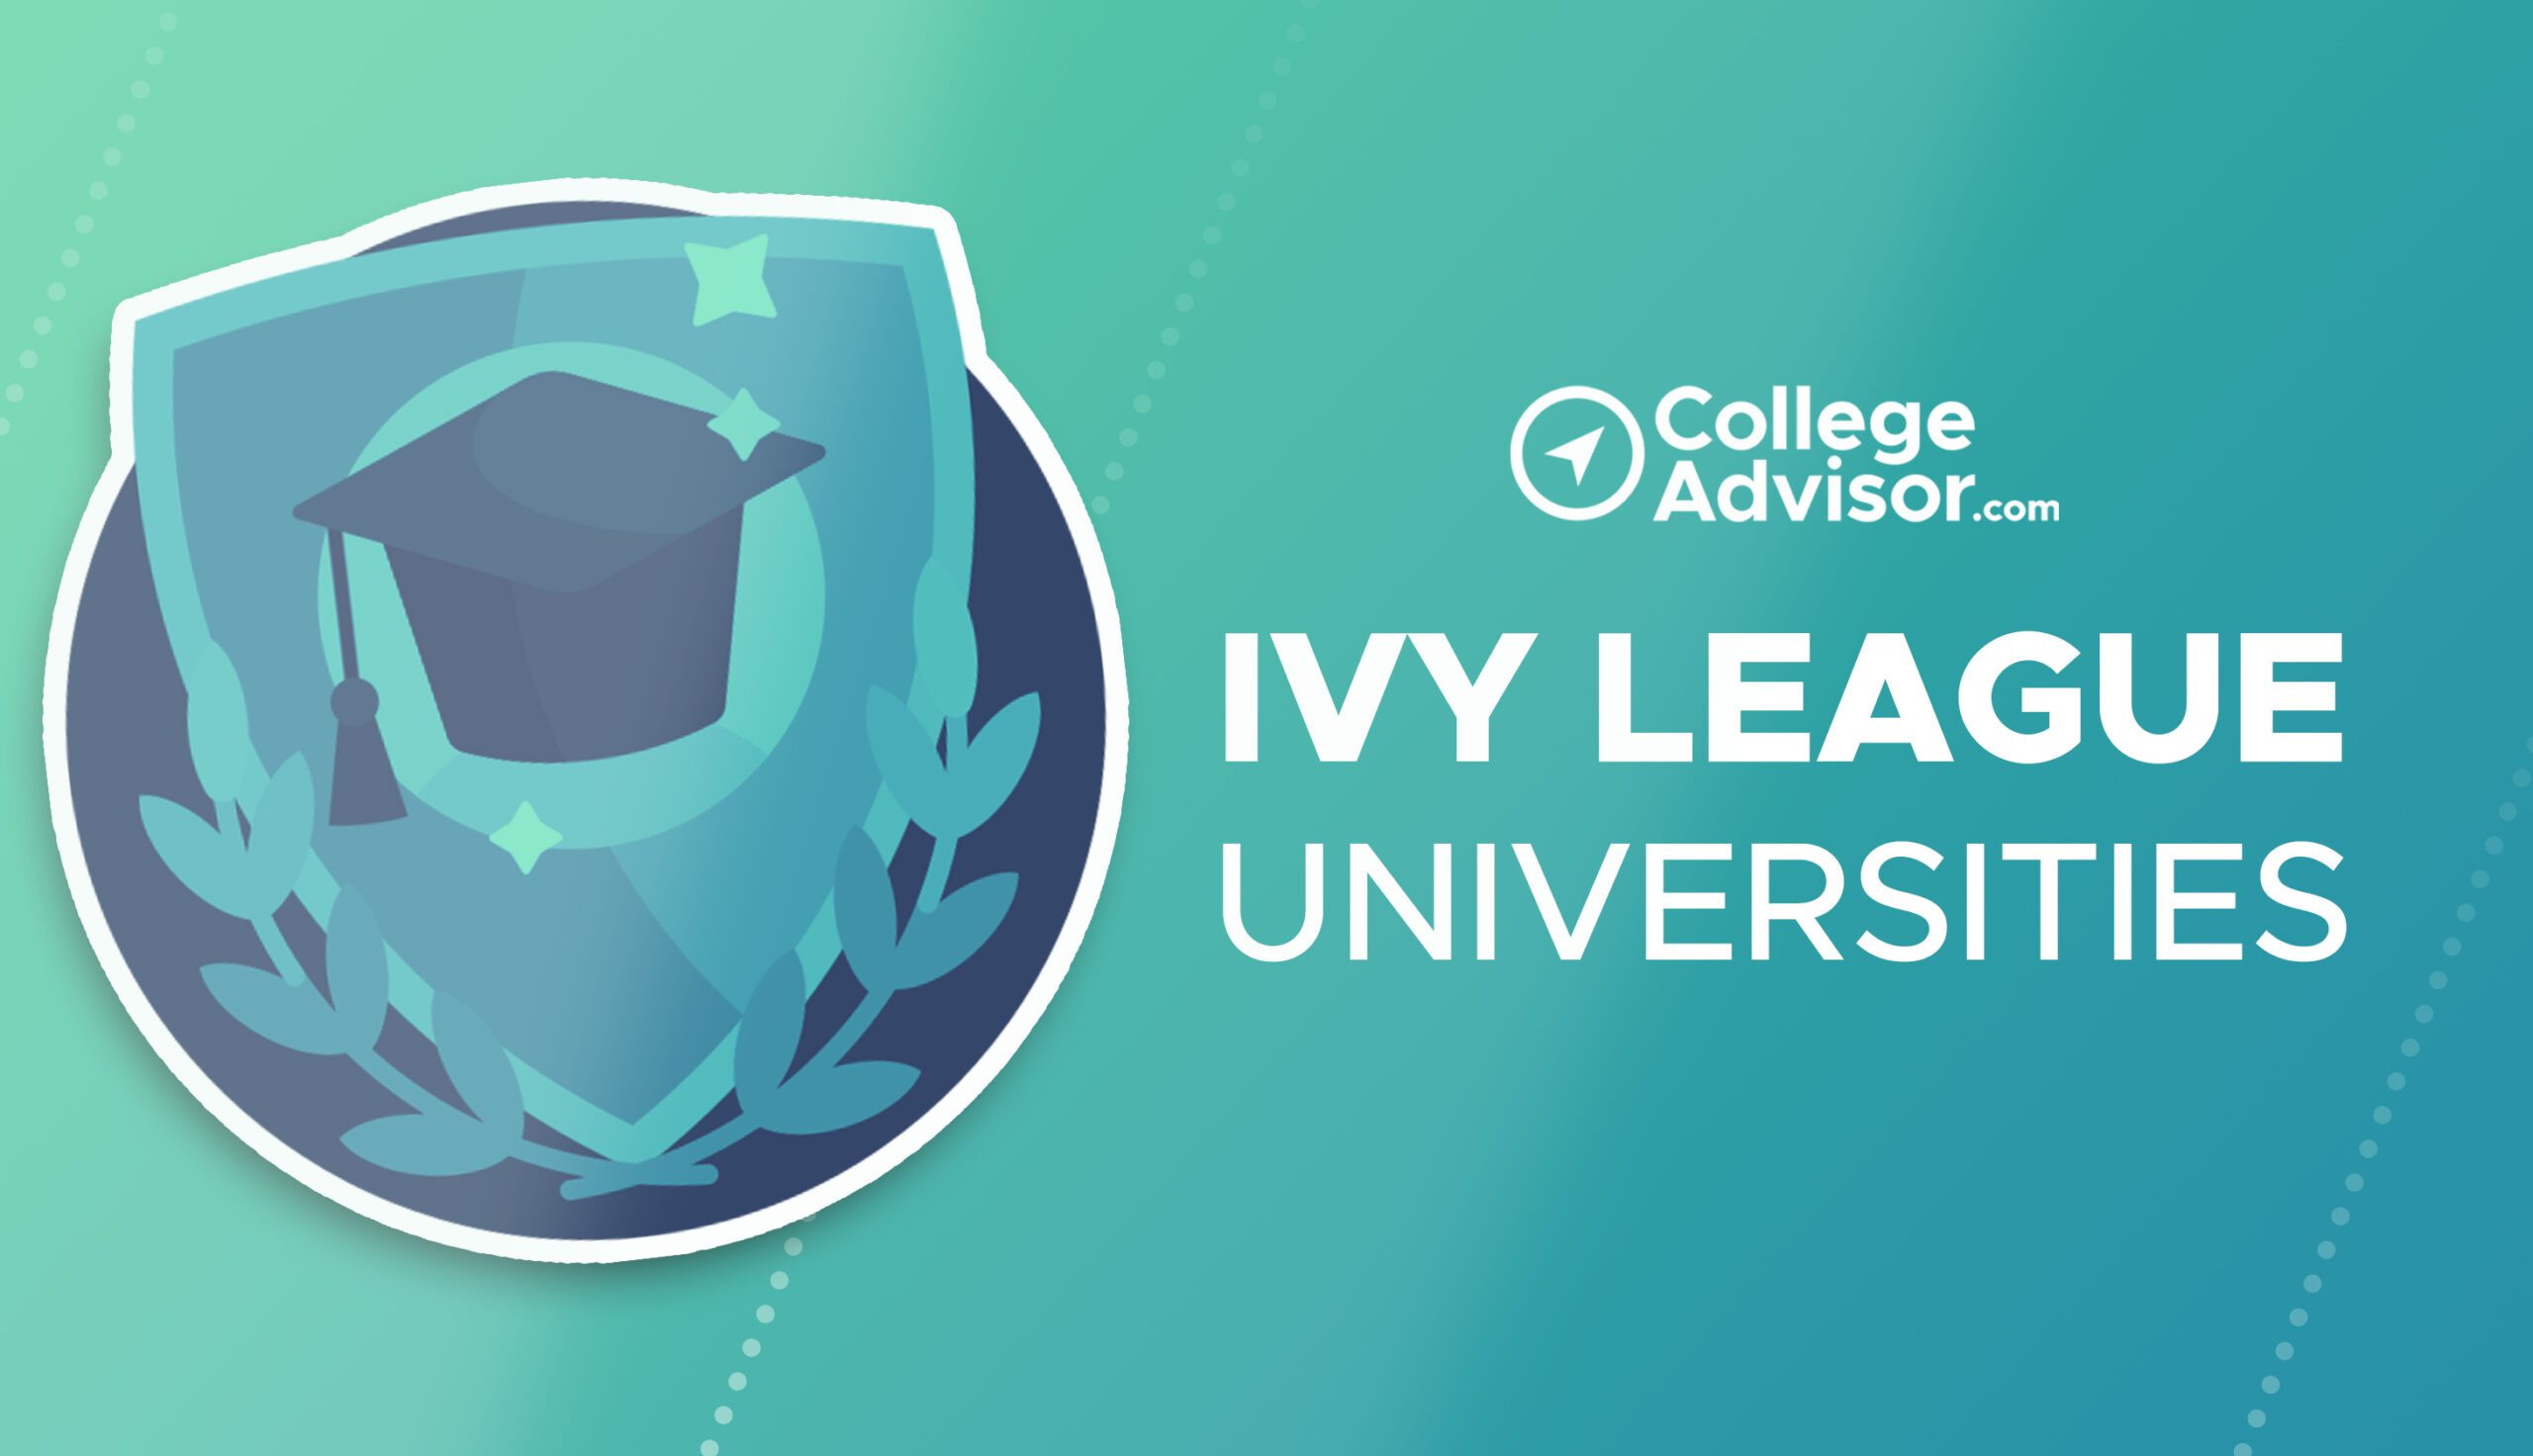 Ivy League Universities & What is the Ivy League? - Expert Guide